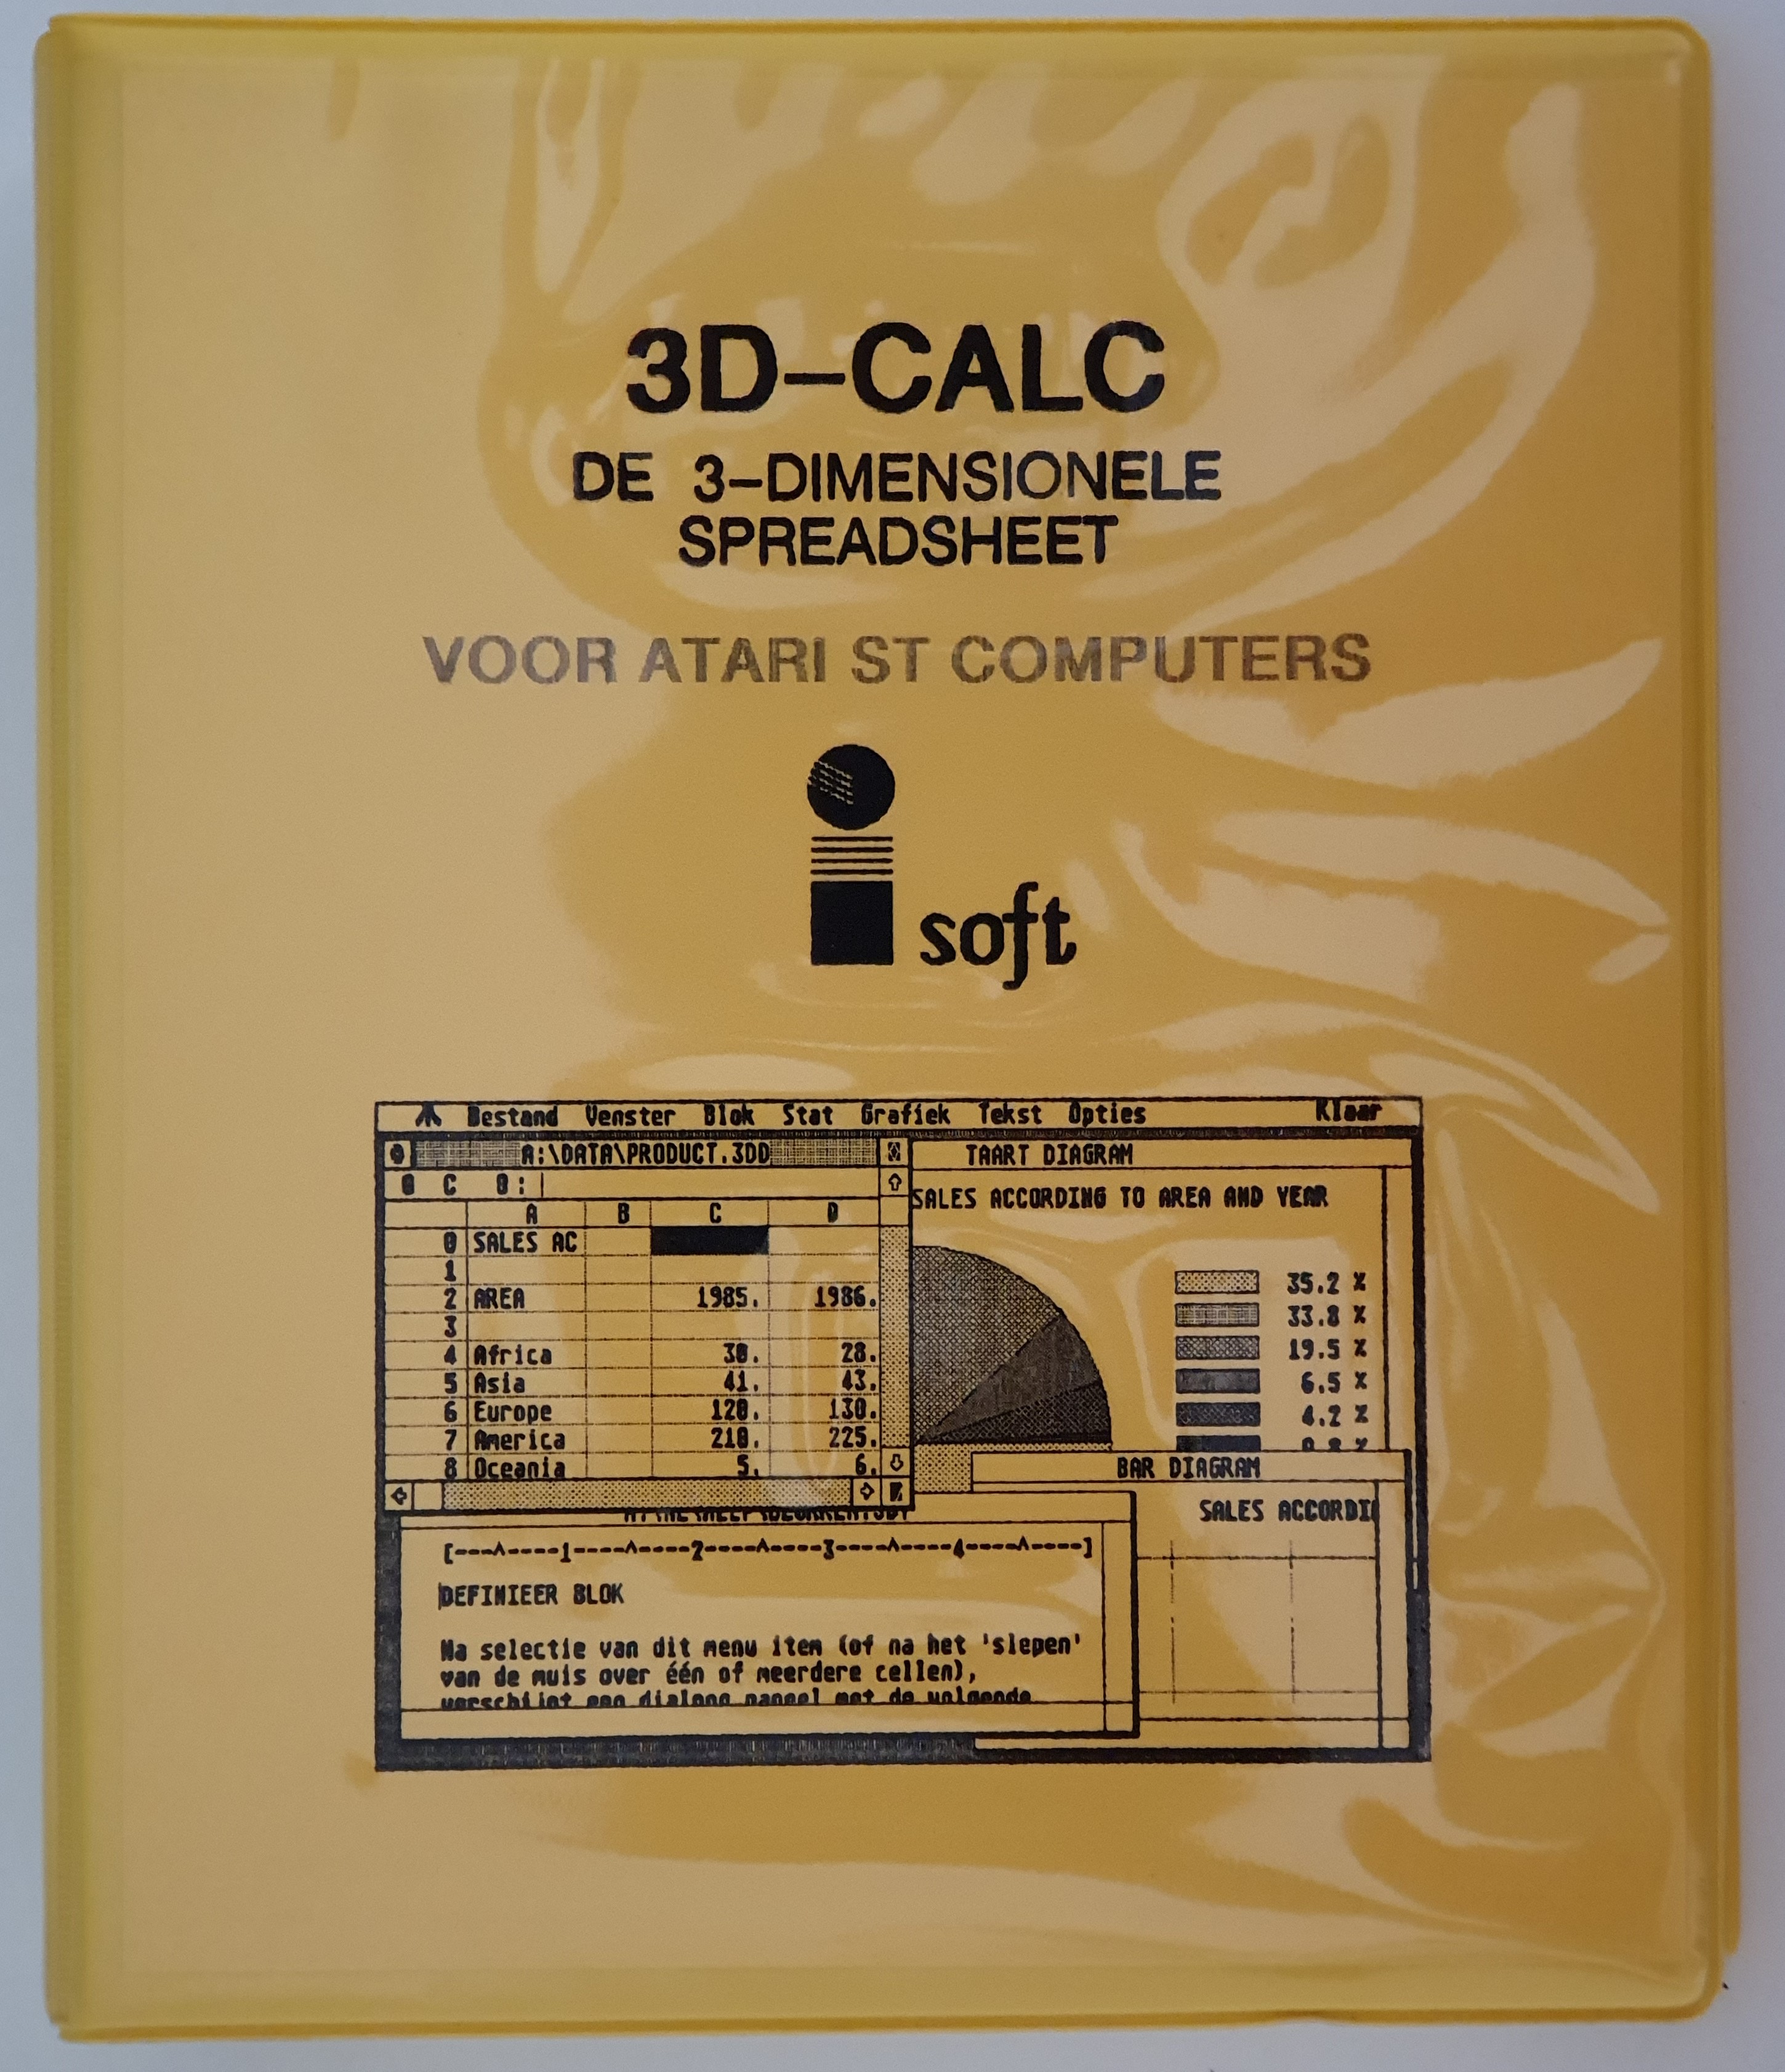 The very first release of 3D-Calc, together with Johan Lammens.